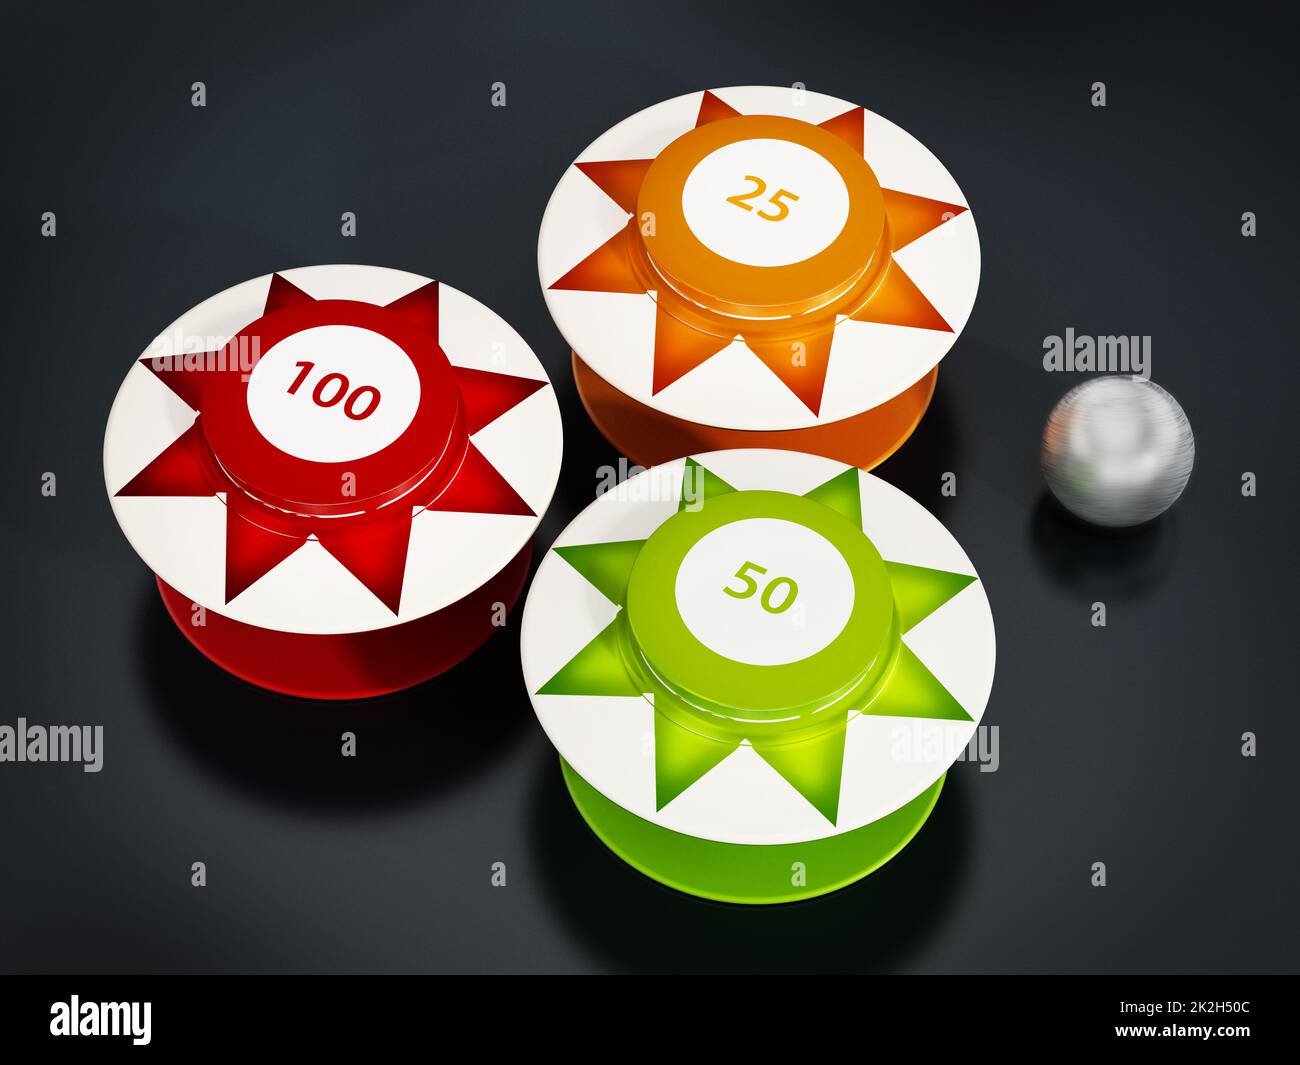 Pinball bumpers and metal ball on black background. 3D illustration Stock Photo